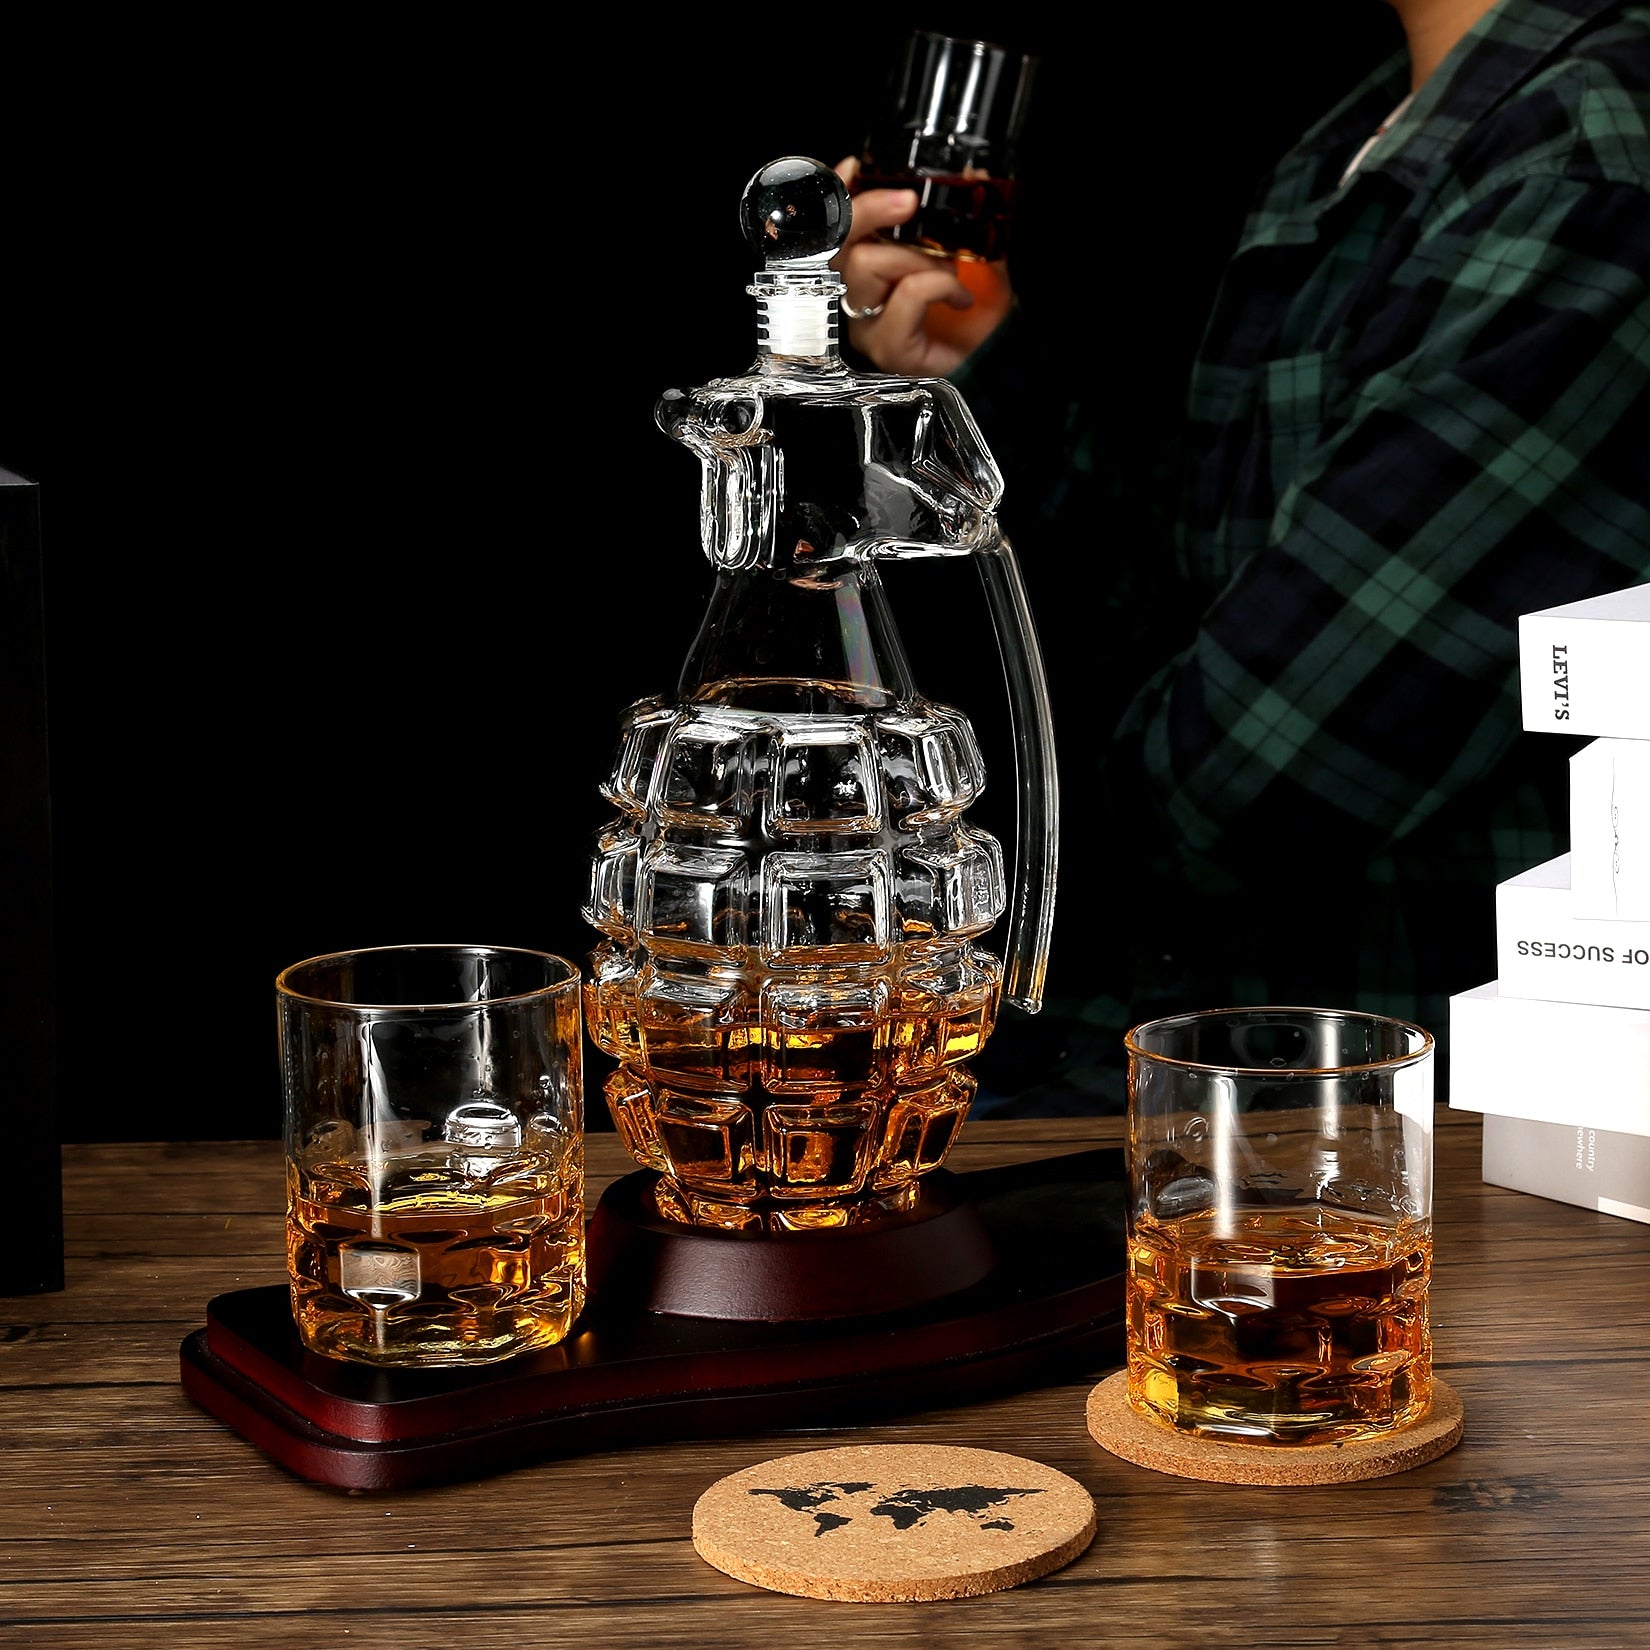 Whiskey Decanter Set Liquor Decanter and 2 Whiskey Glasses with Wooden Holder Scotch Bourbon Gift for Men Father's Day Gift